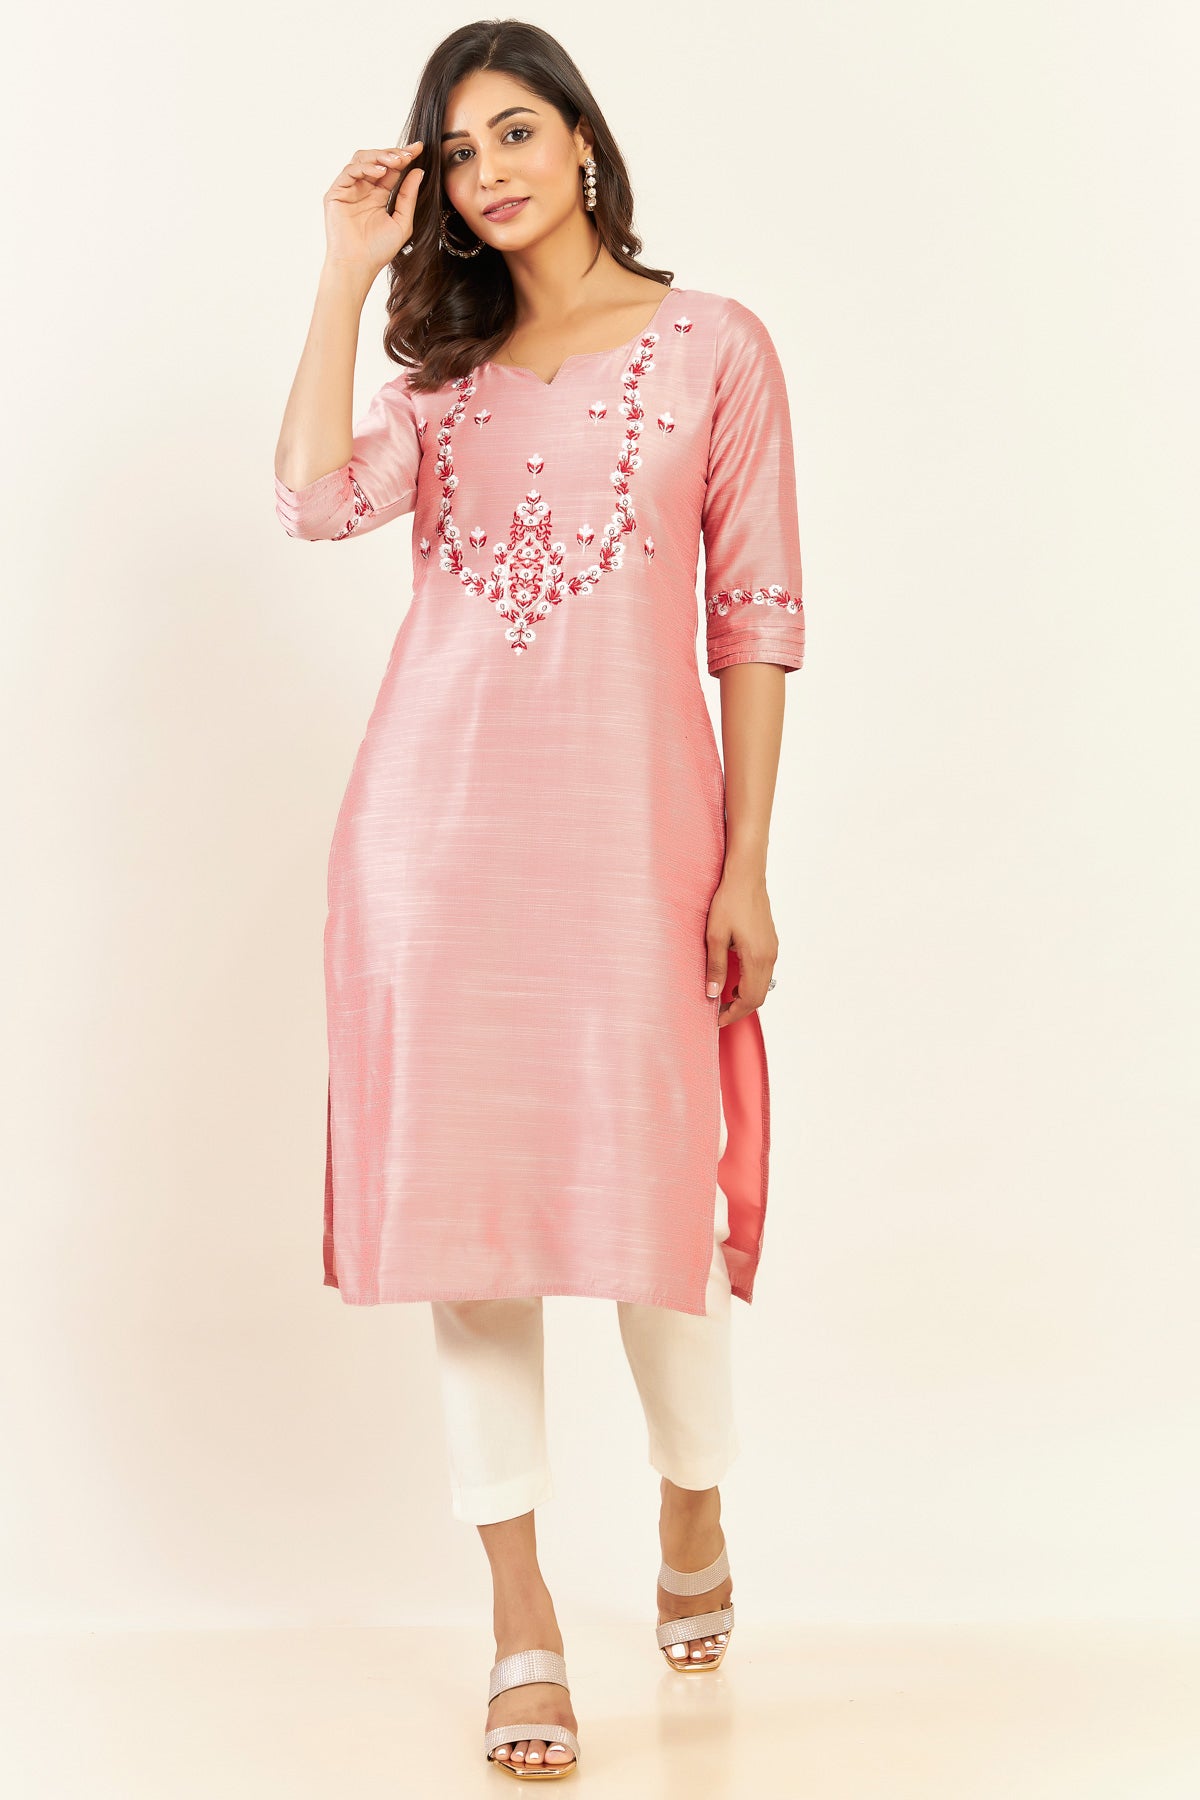 Contrast Floral Embroidered Women's Kurta - Peach